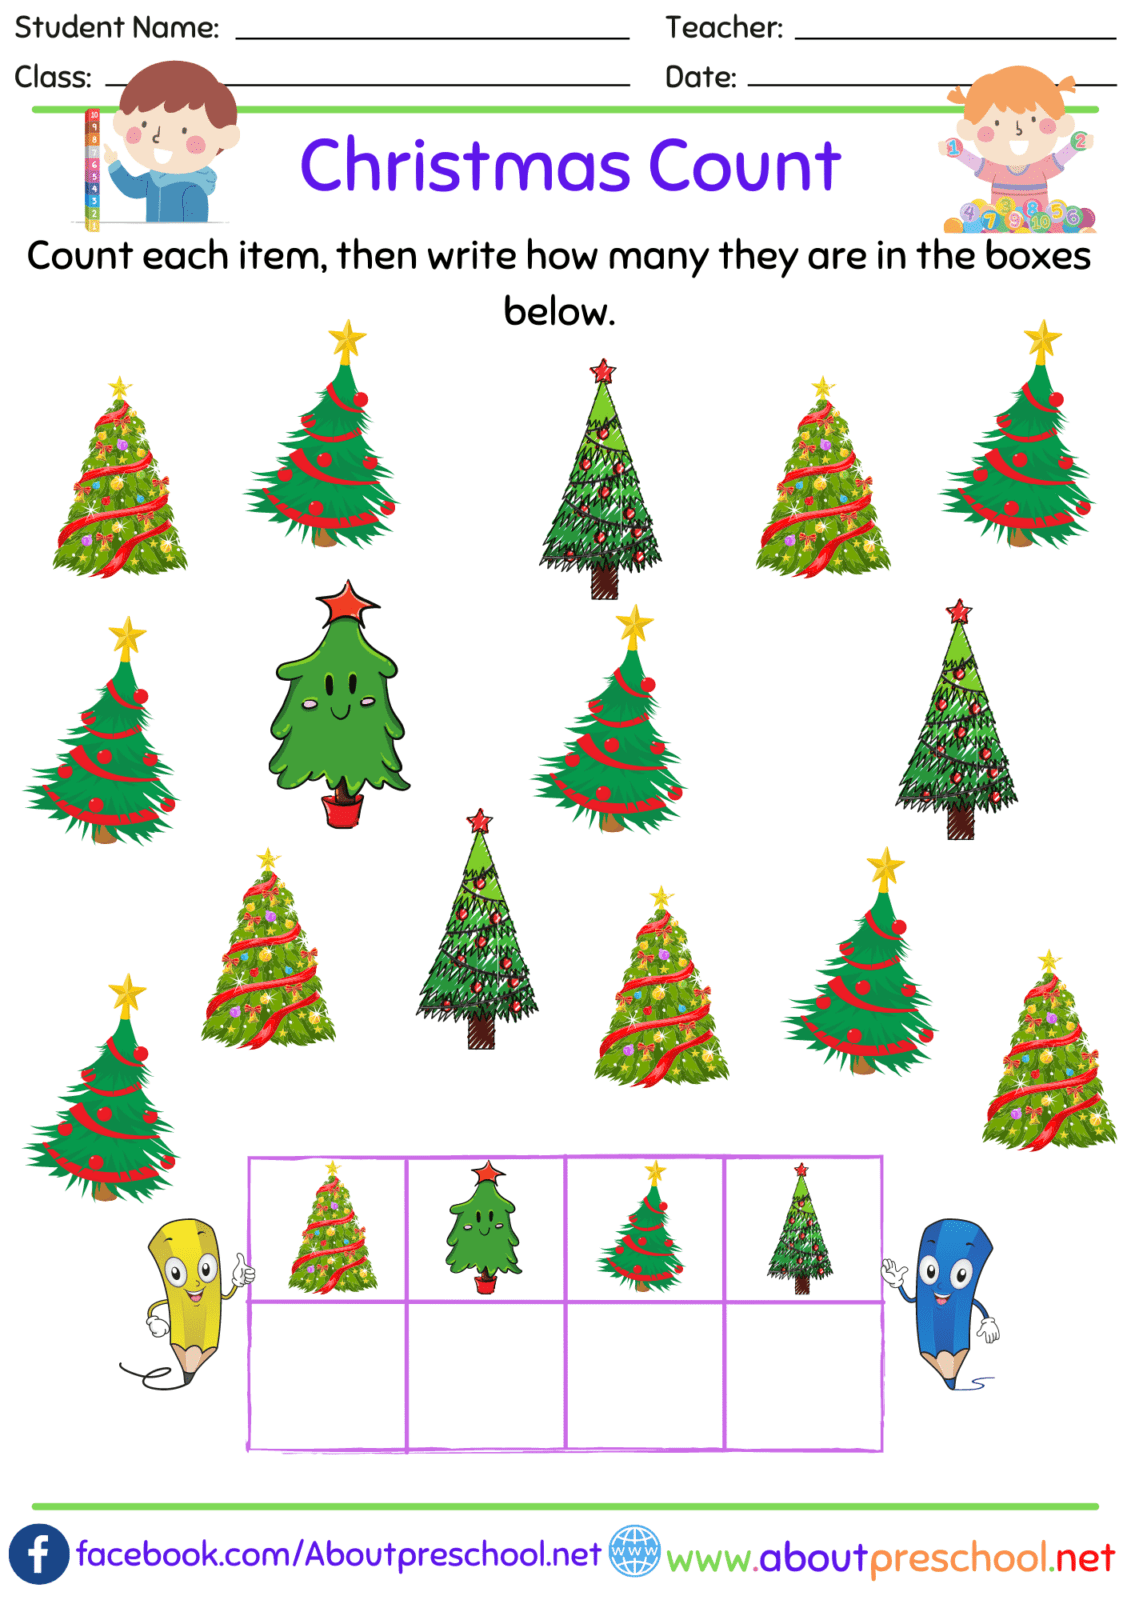 Christmas Counting Activities 4